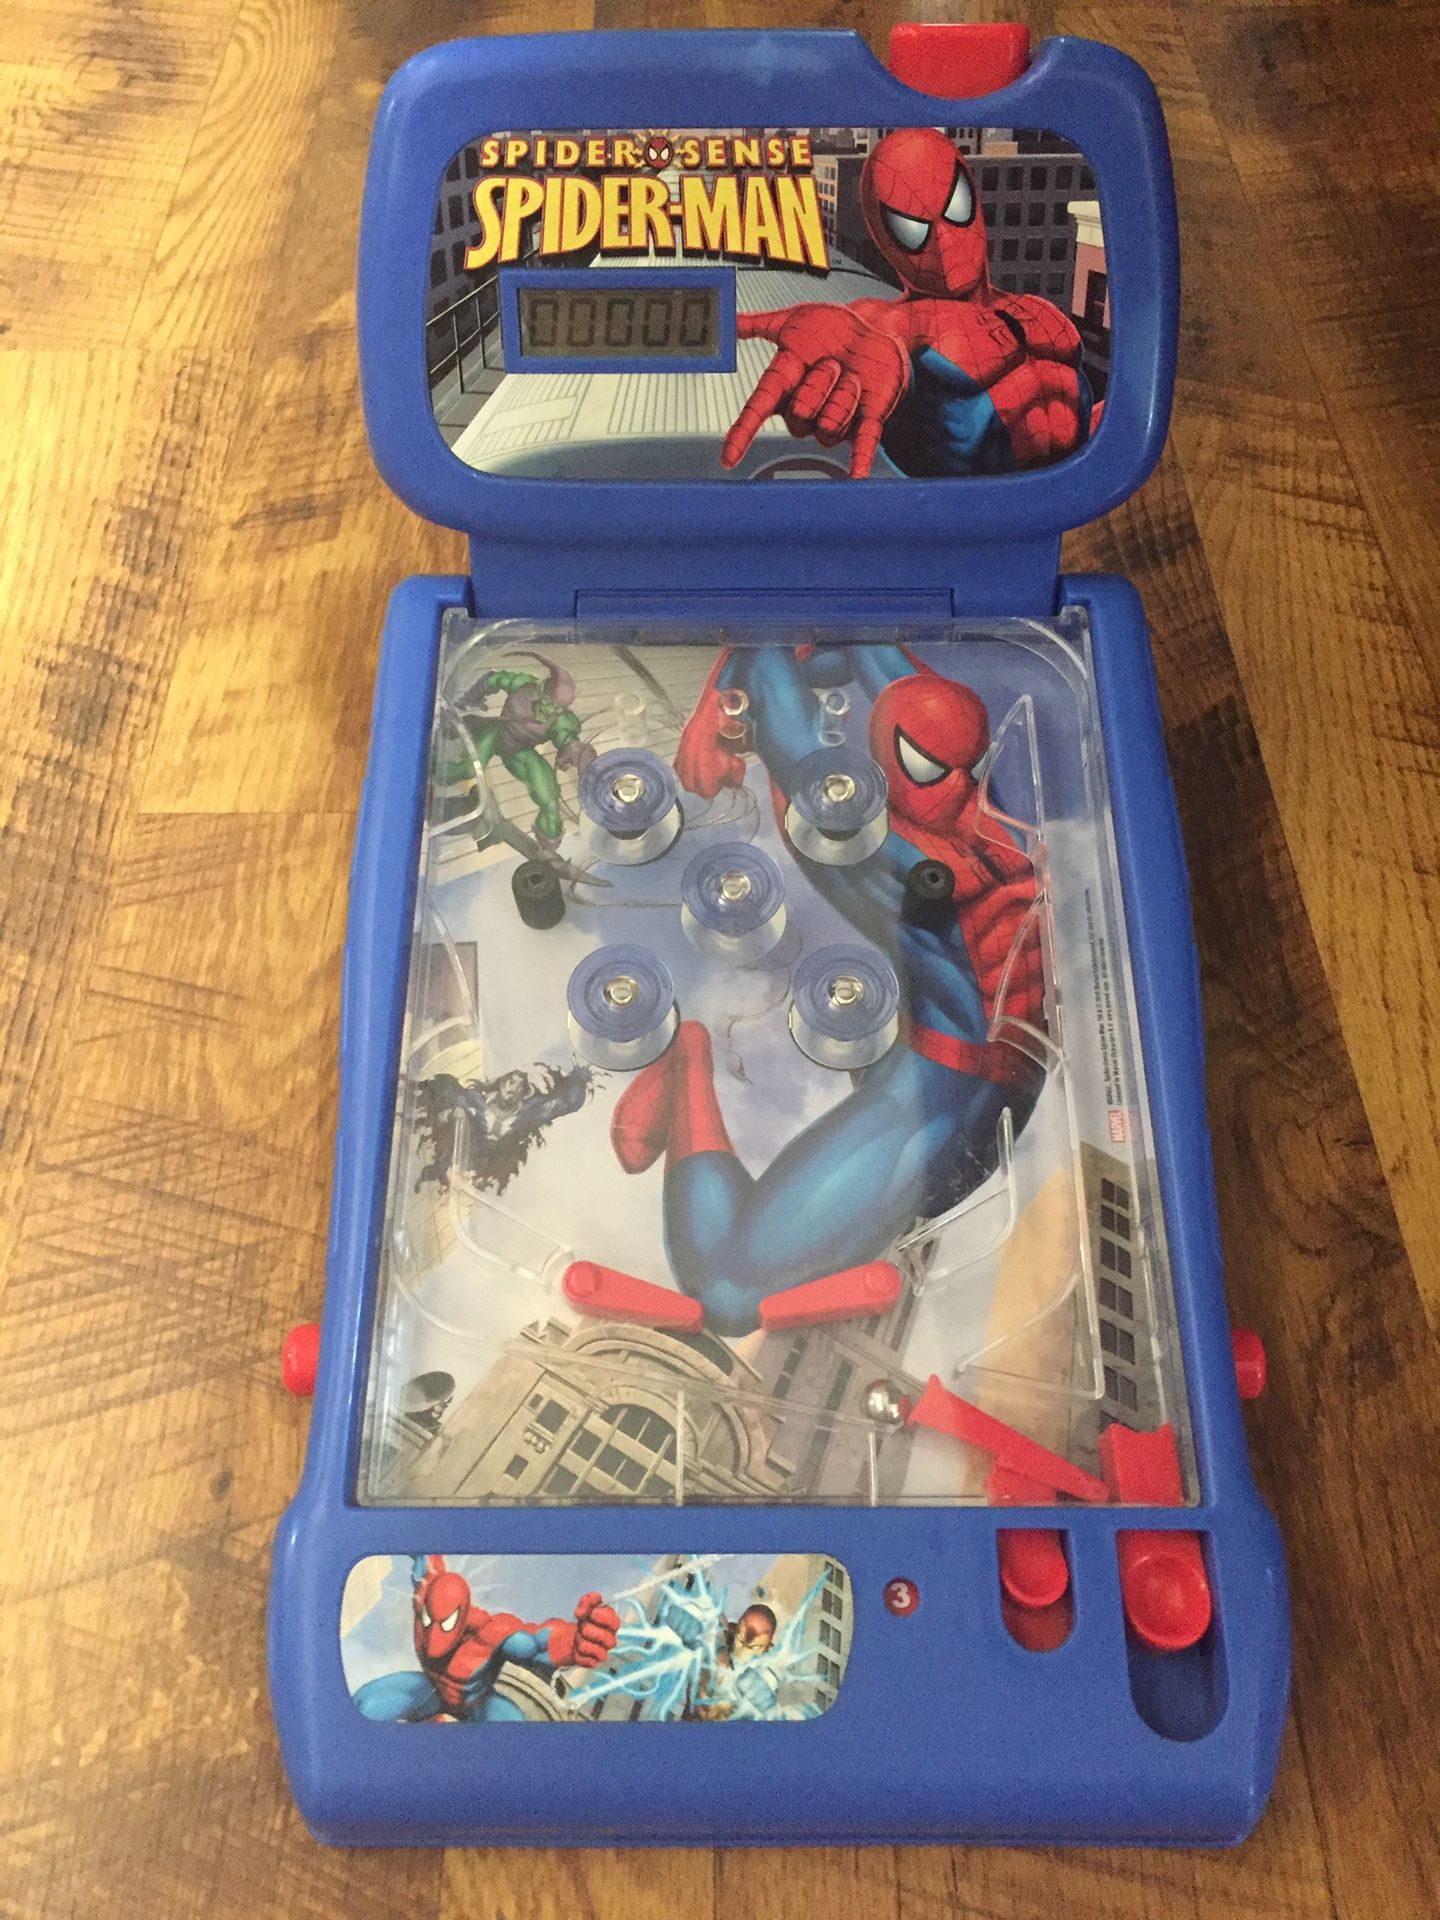 Spider-Man table top electronic (lights and sounds) pinball game for kids.